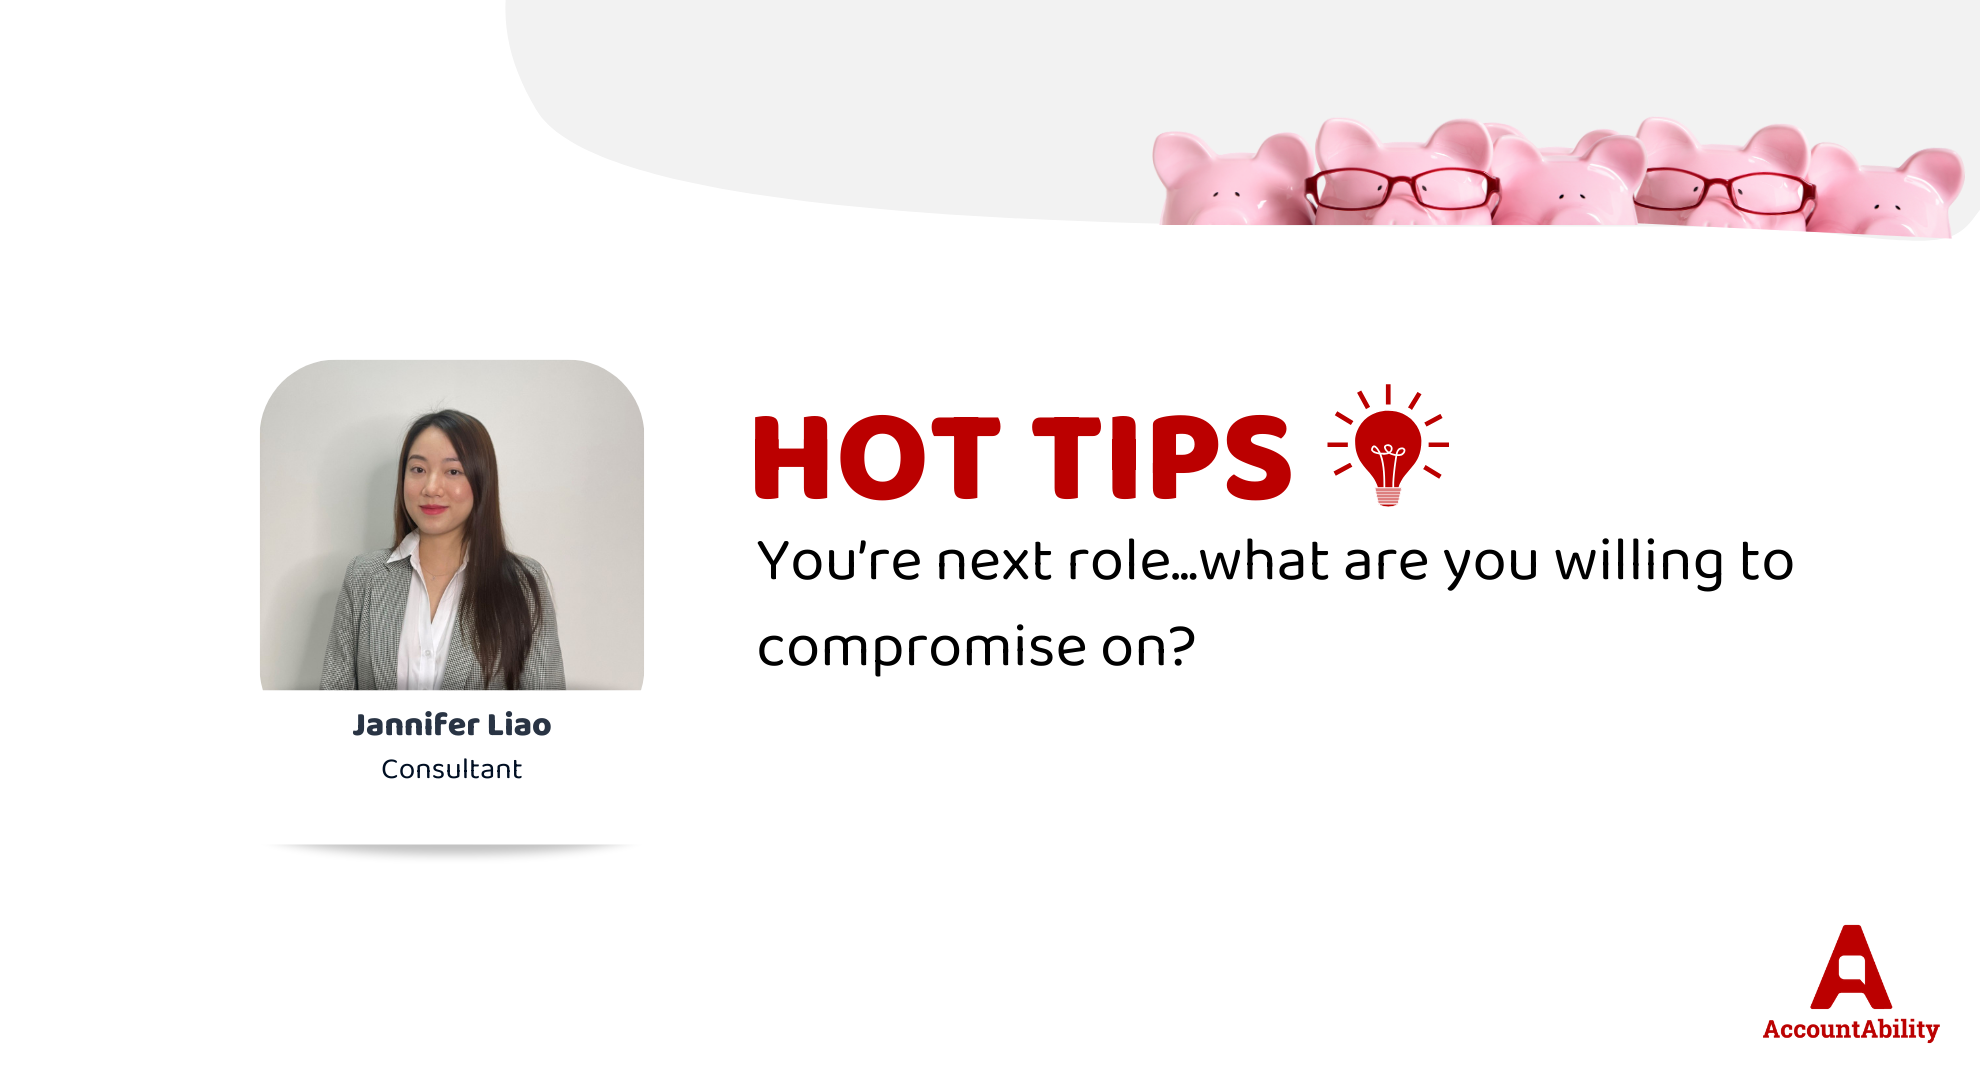 Your next role...what are you willing to compromise on?